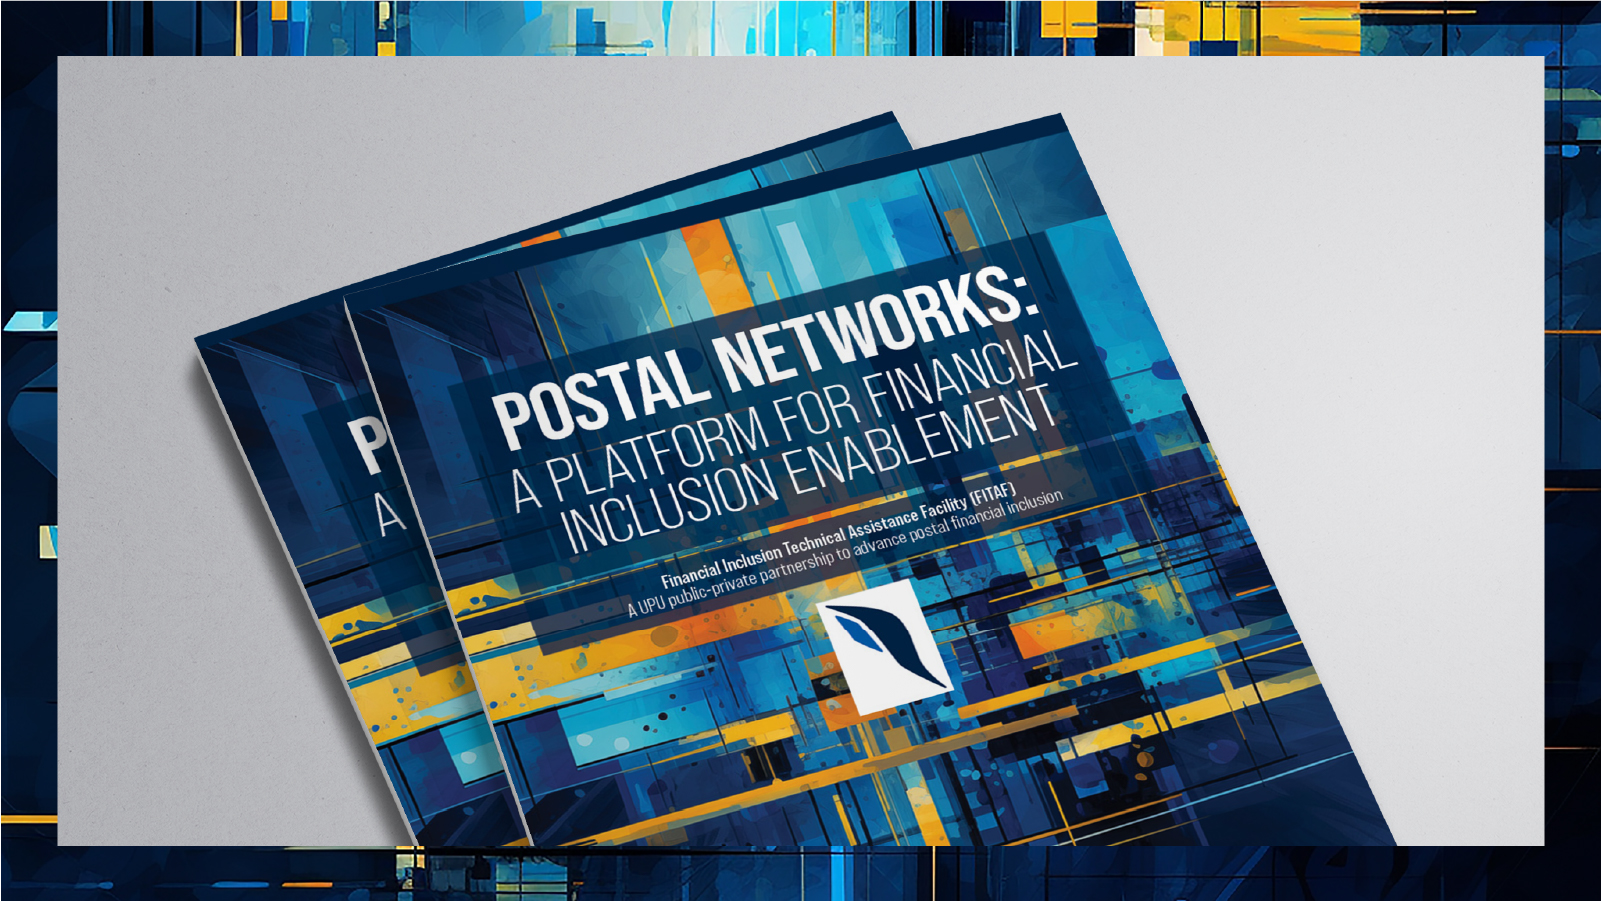 Postal networks: A Platform for Financial Inclusion Enablement